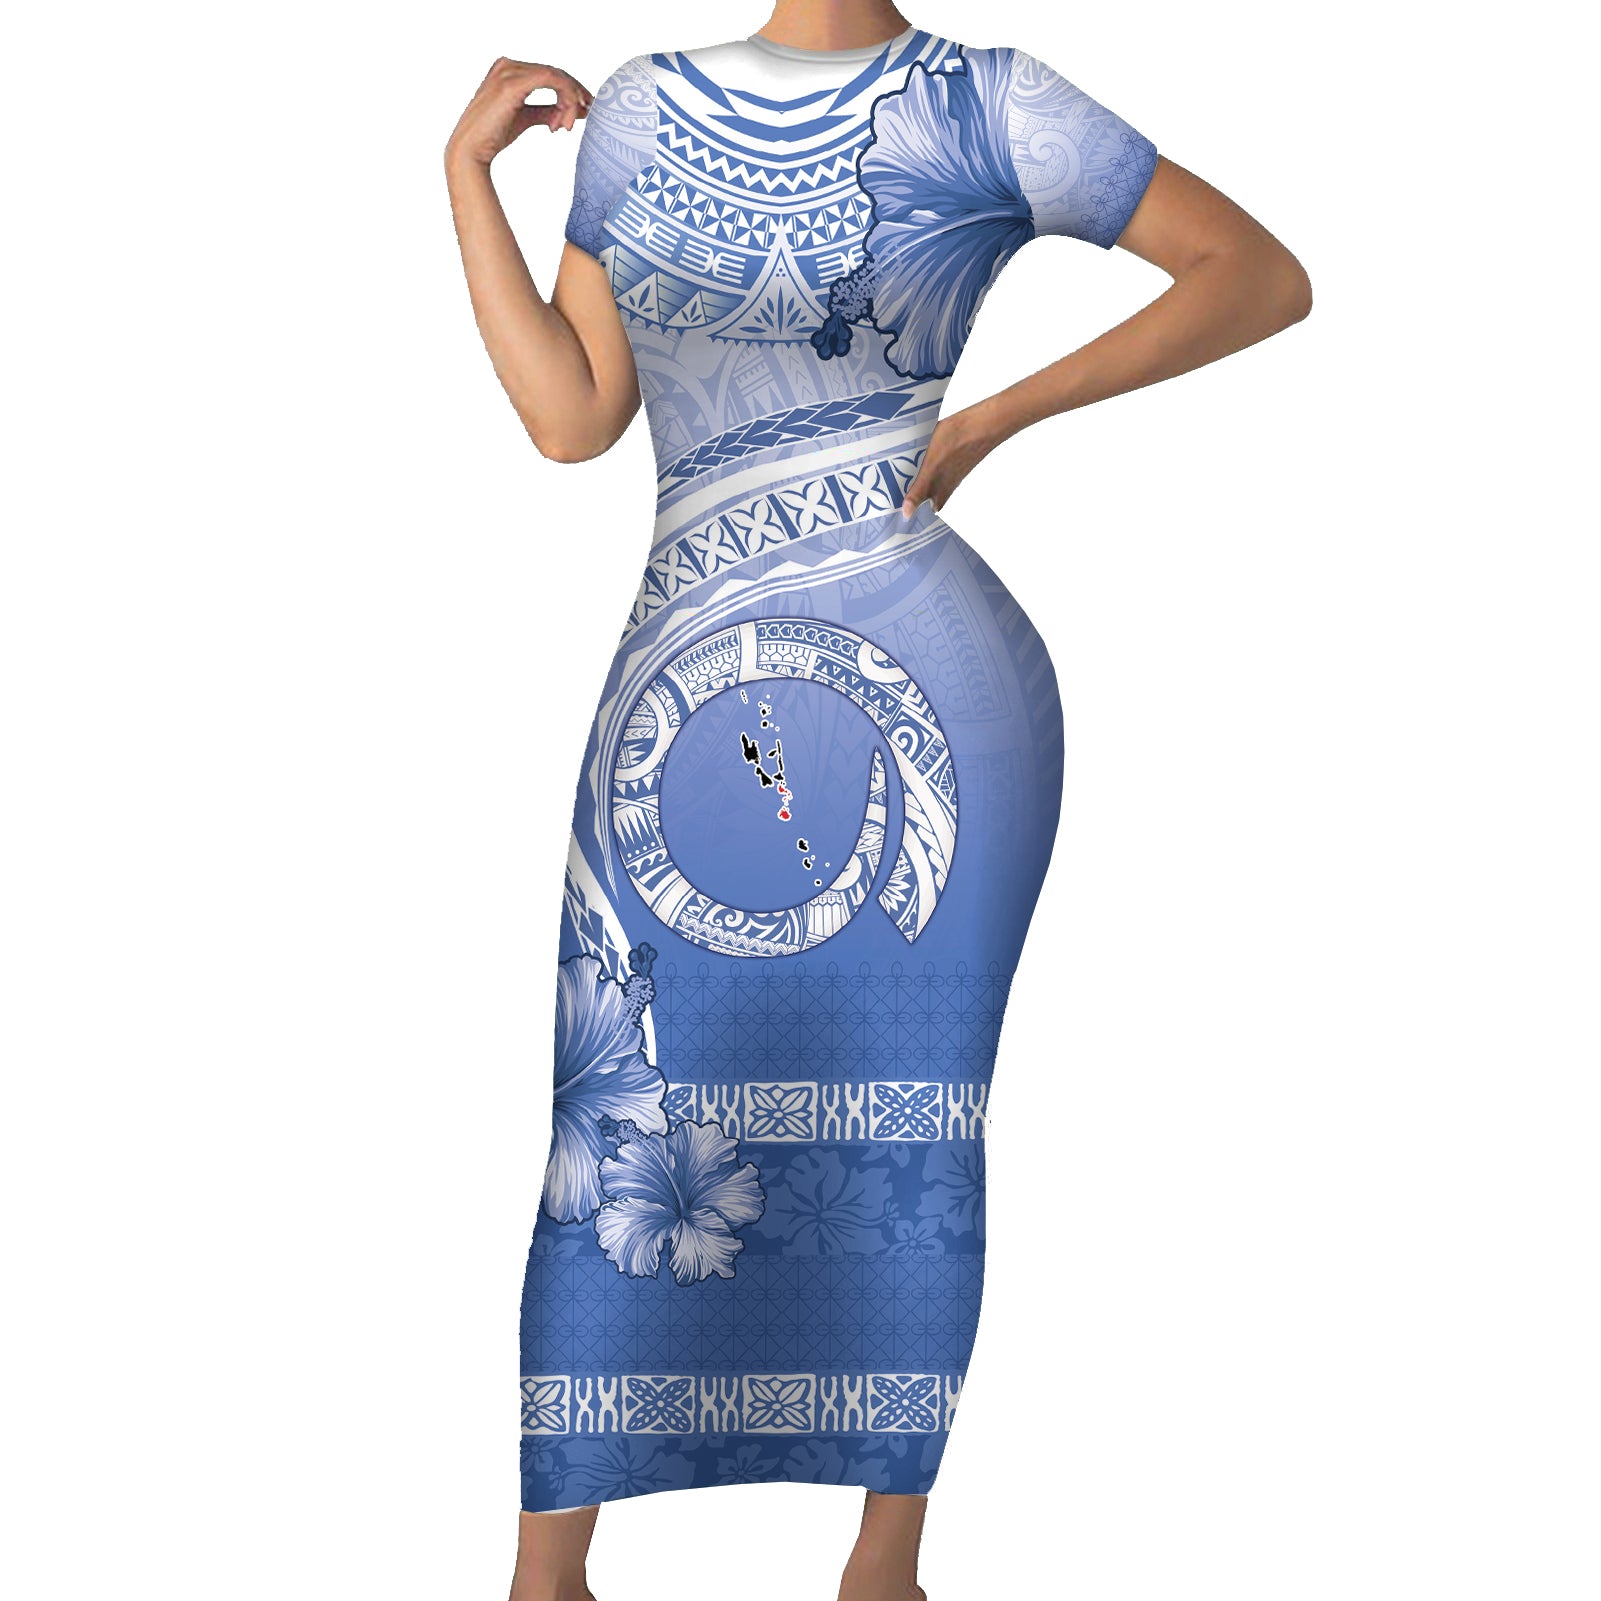 Shefa Vanuatu Short Sleeve Bodycon Dress Hibiscus Sand Drawing with Pacific Pattern